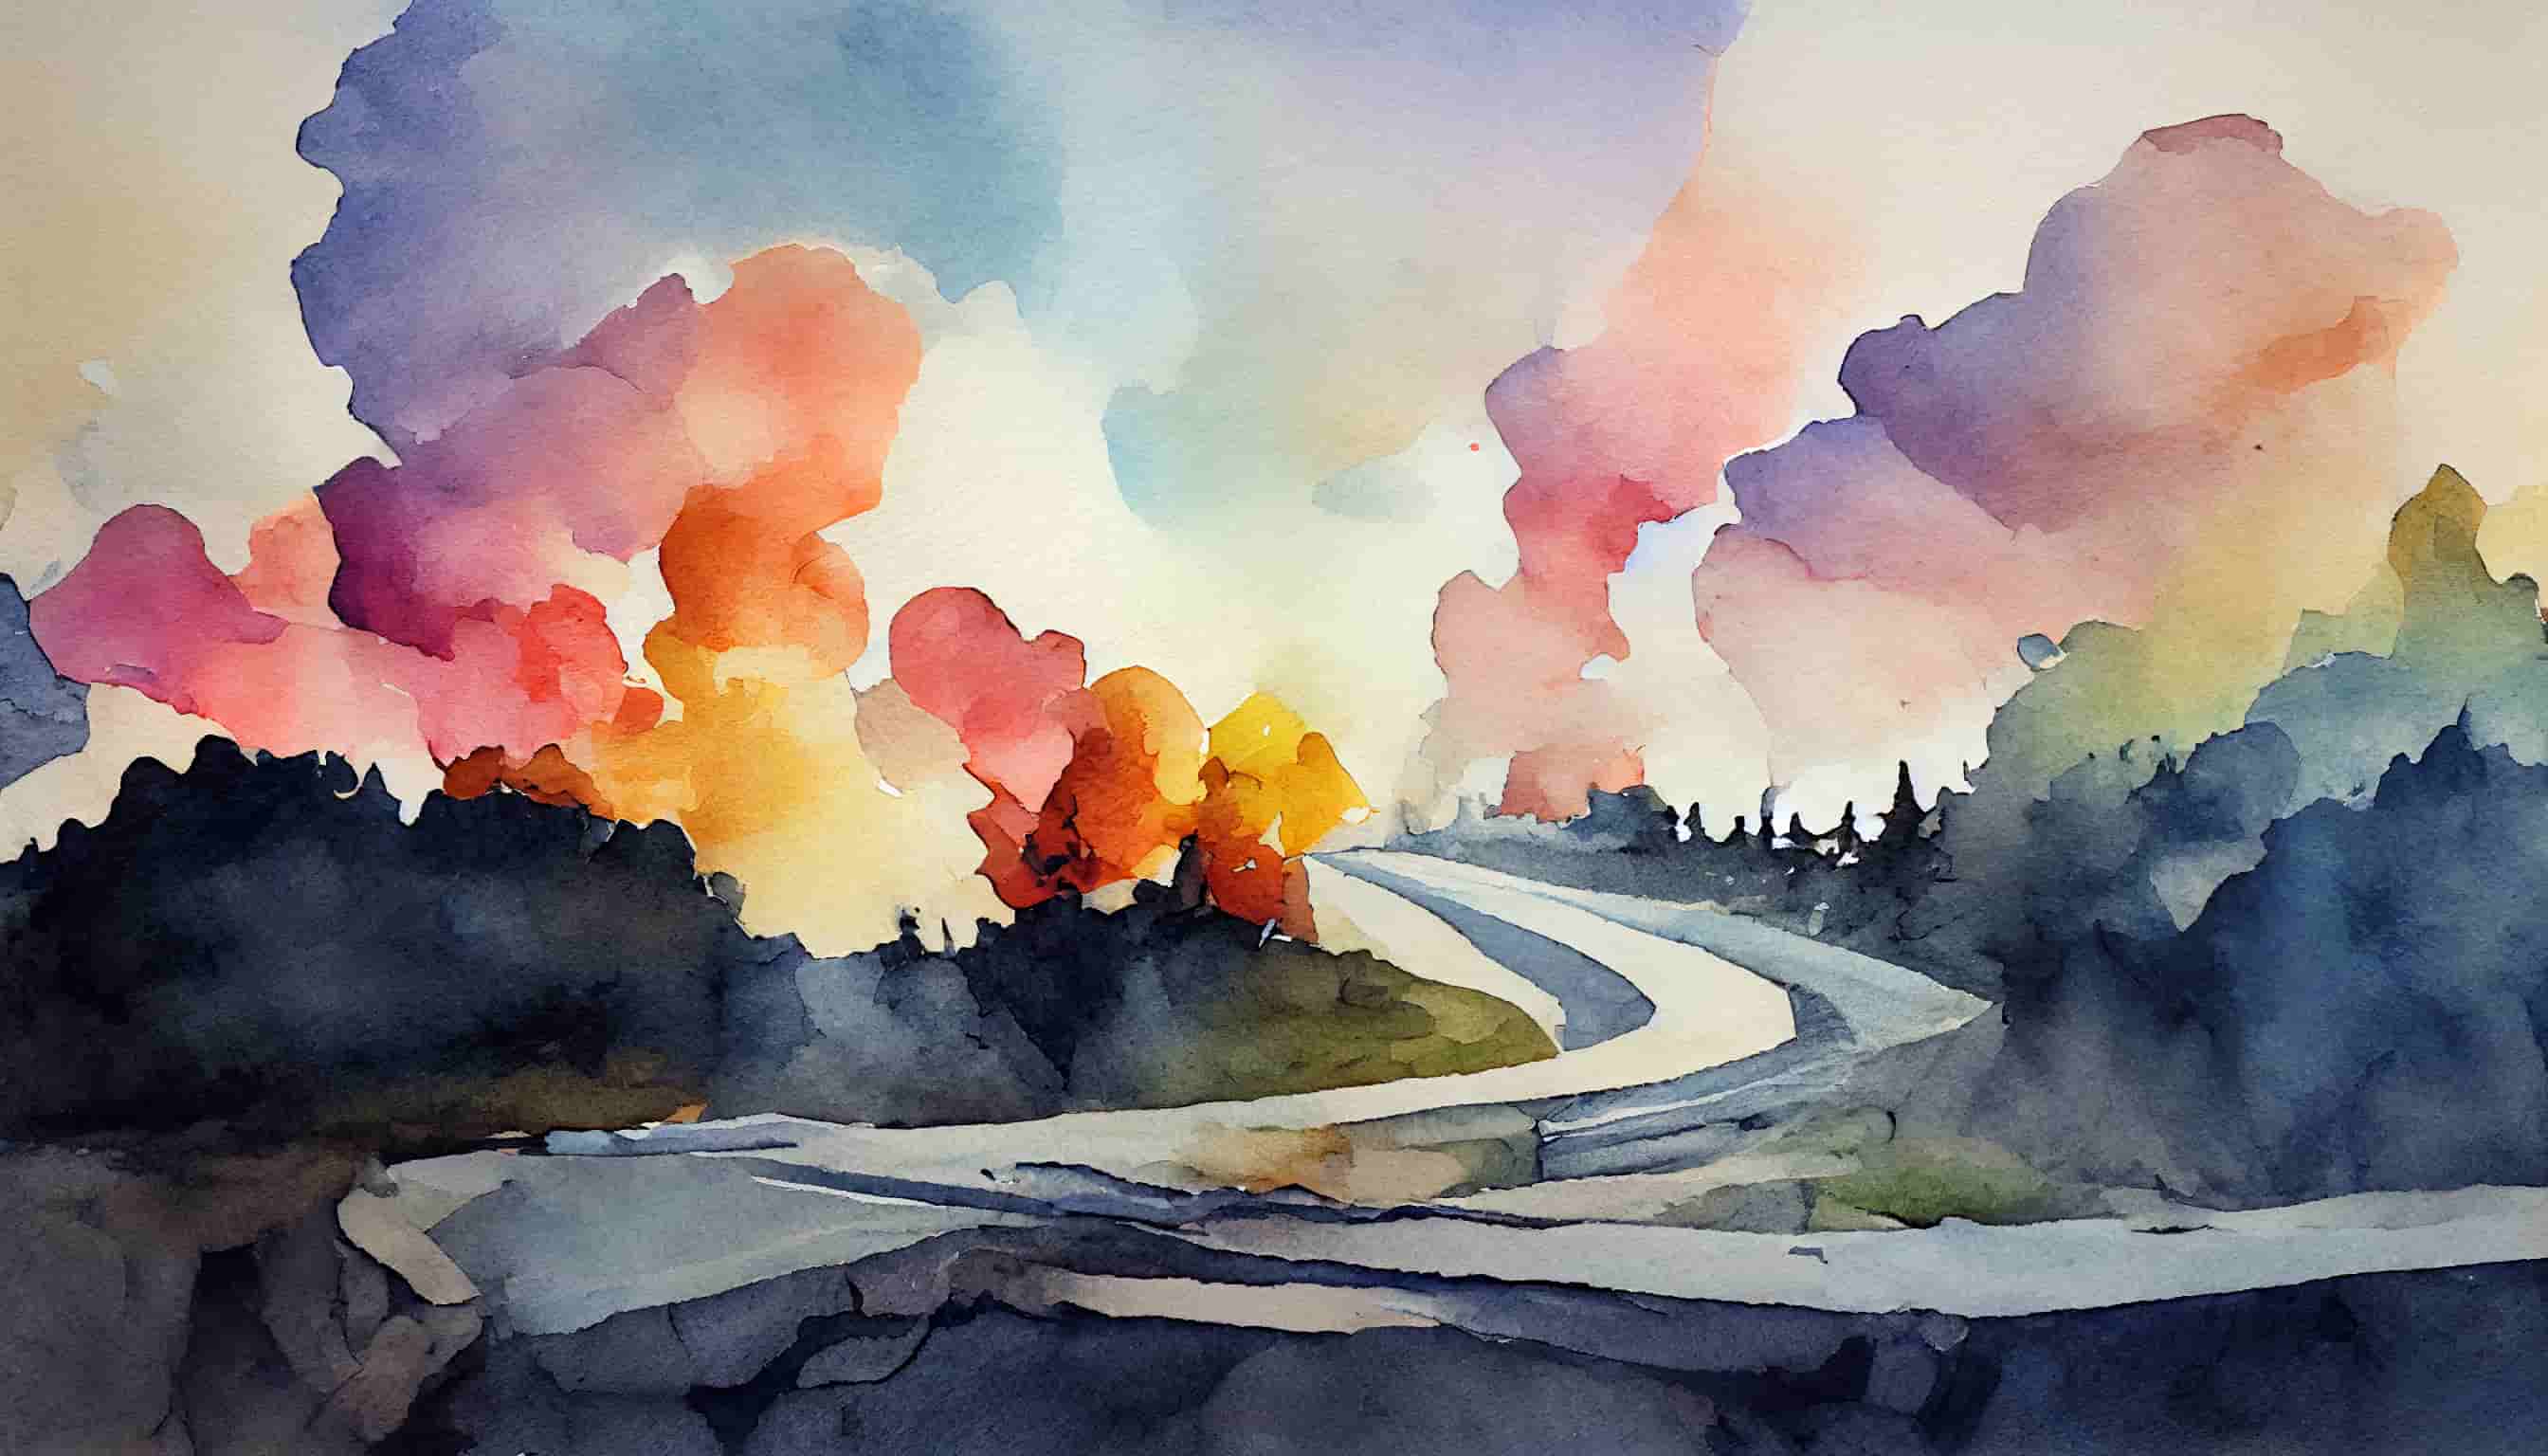 A road leading off in the distance with colorful clouds